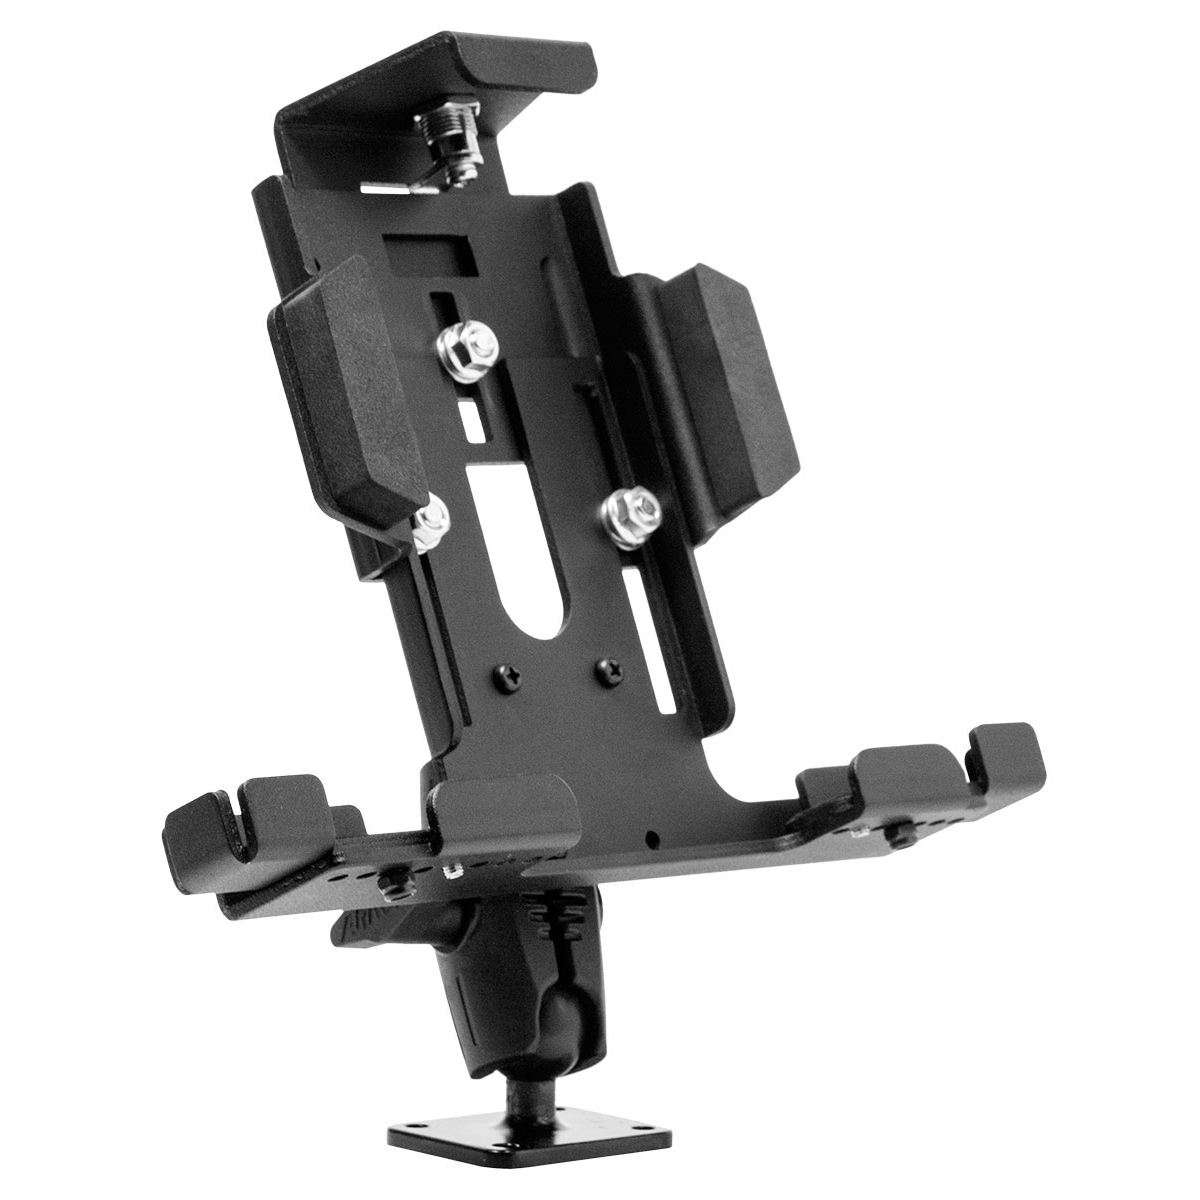 Crosscall Core T4 R1200GS mount by Skulbl4k4